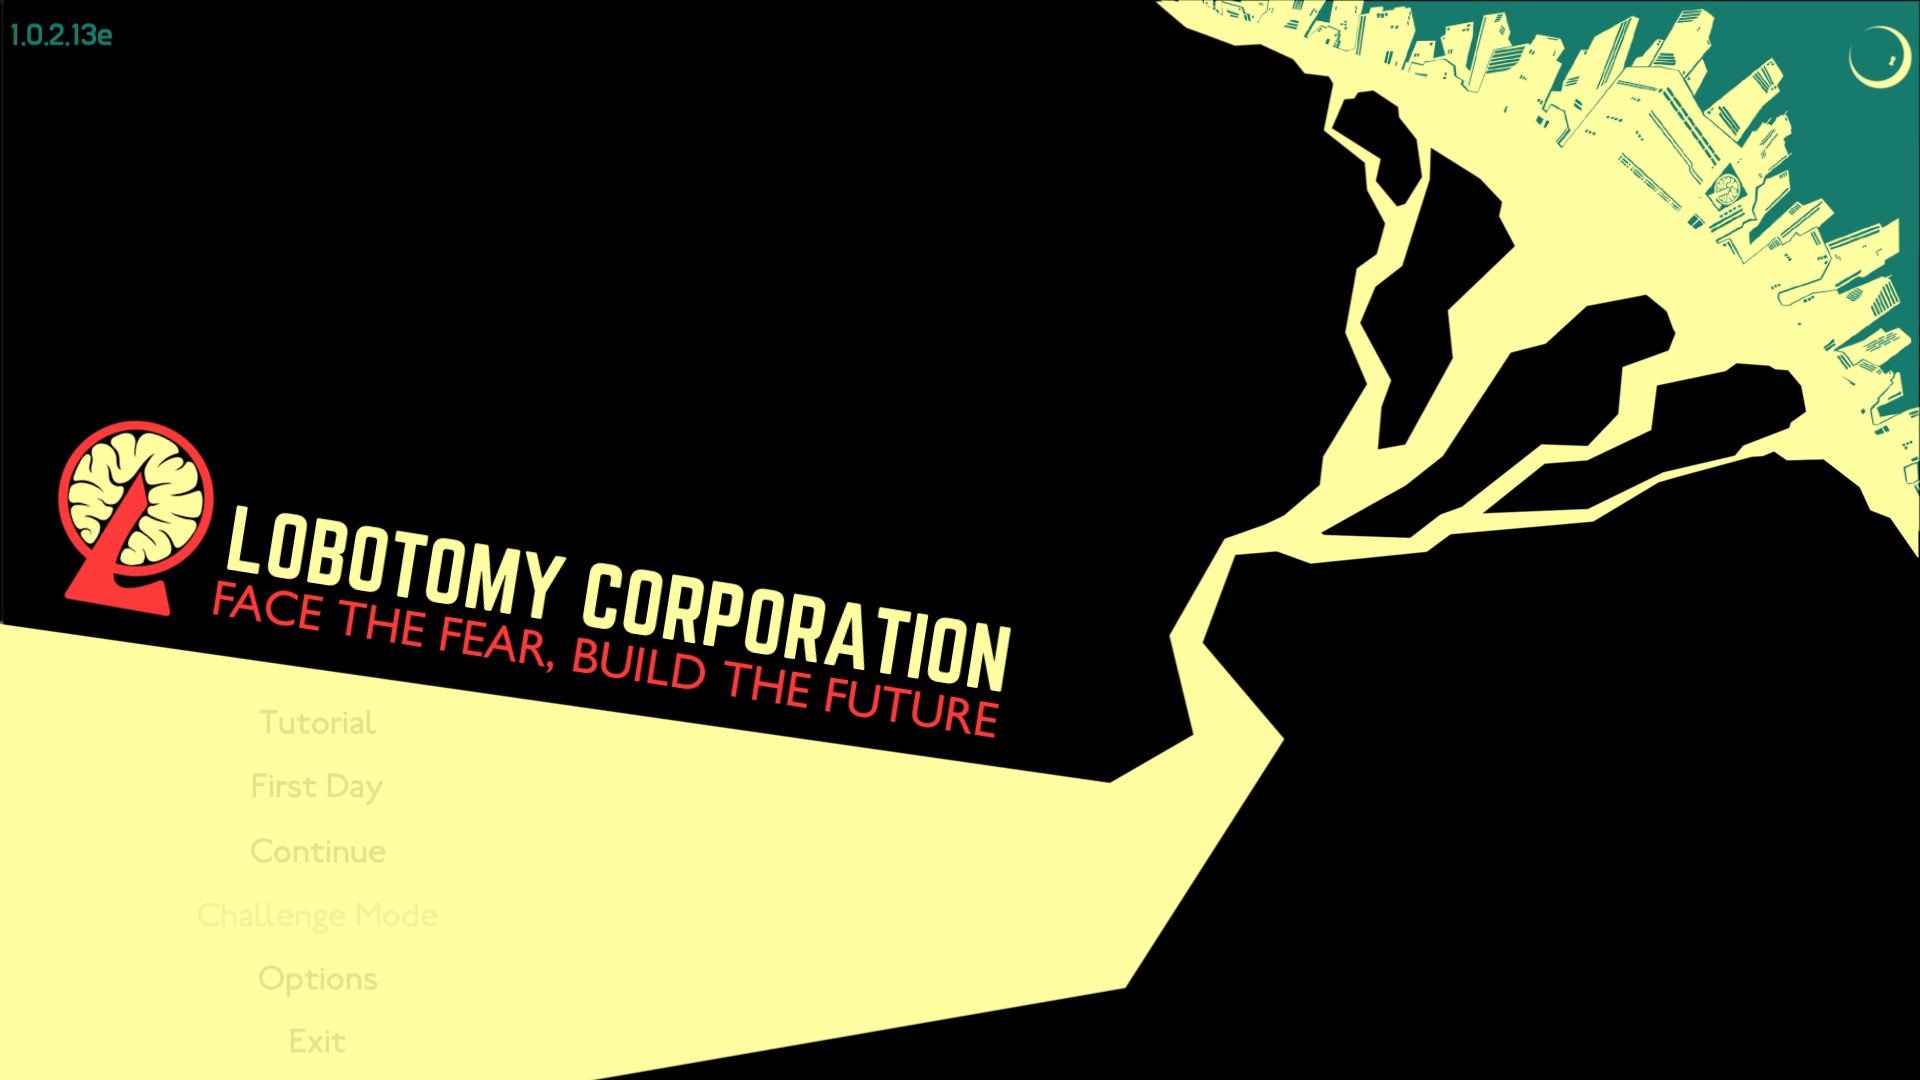 Facing the Fear; Building the Future: Lobotomy Corporation and Processing Horror